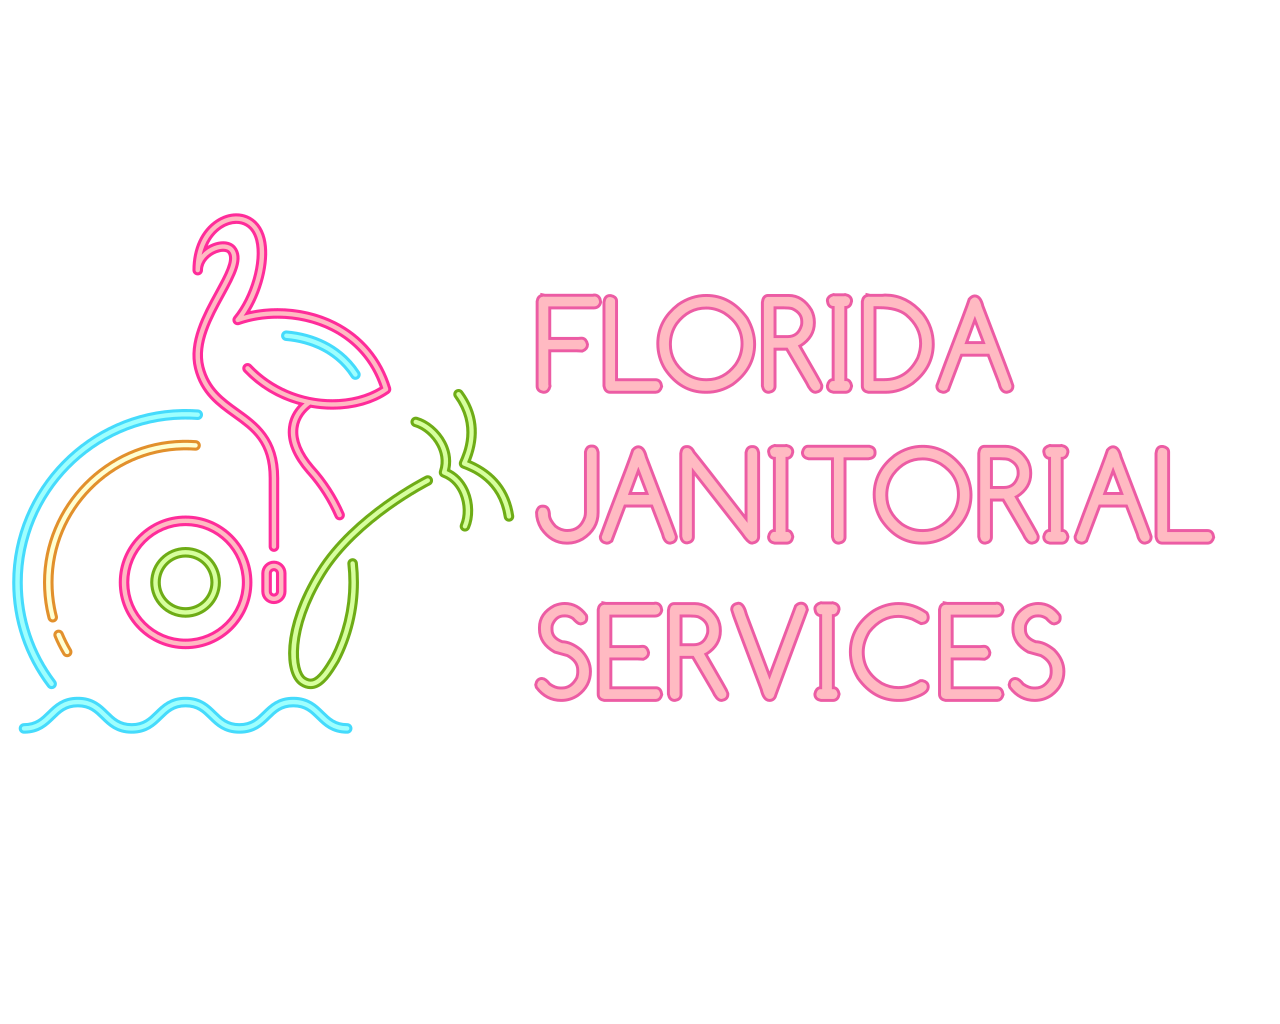 Florida Janitorial Services